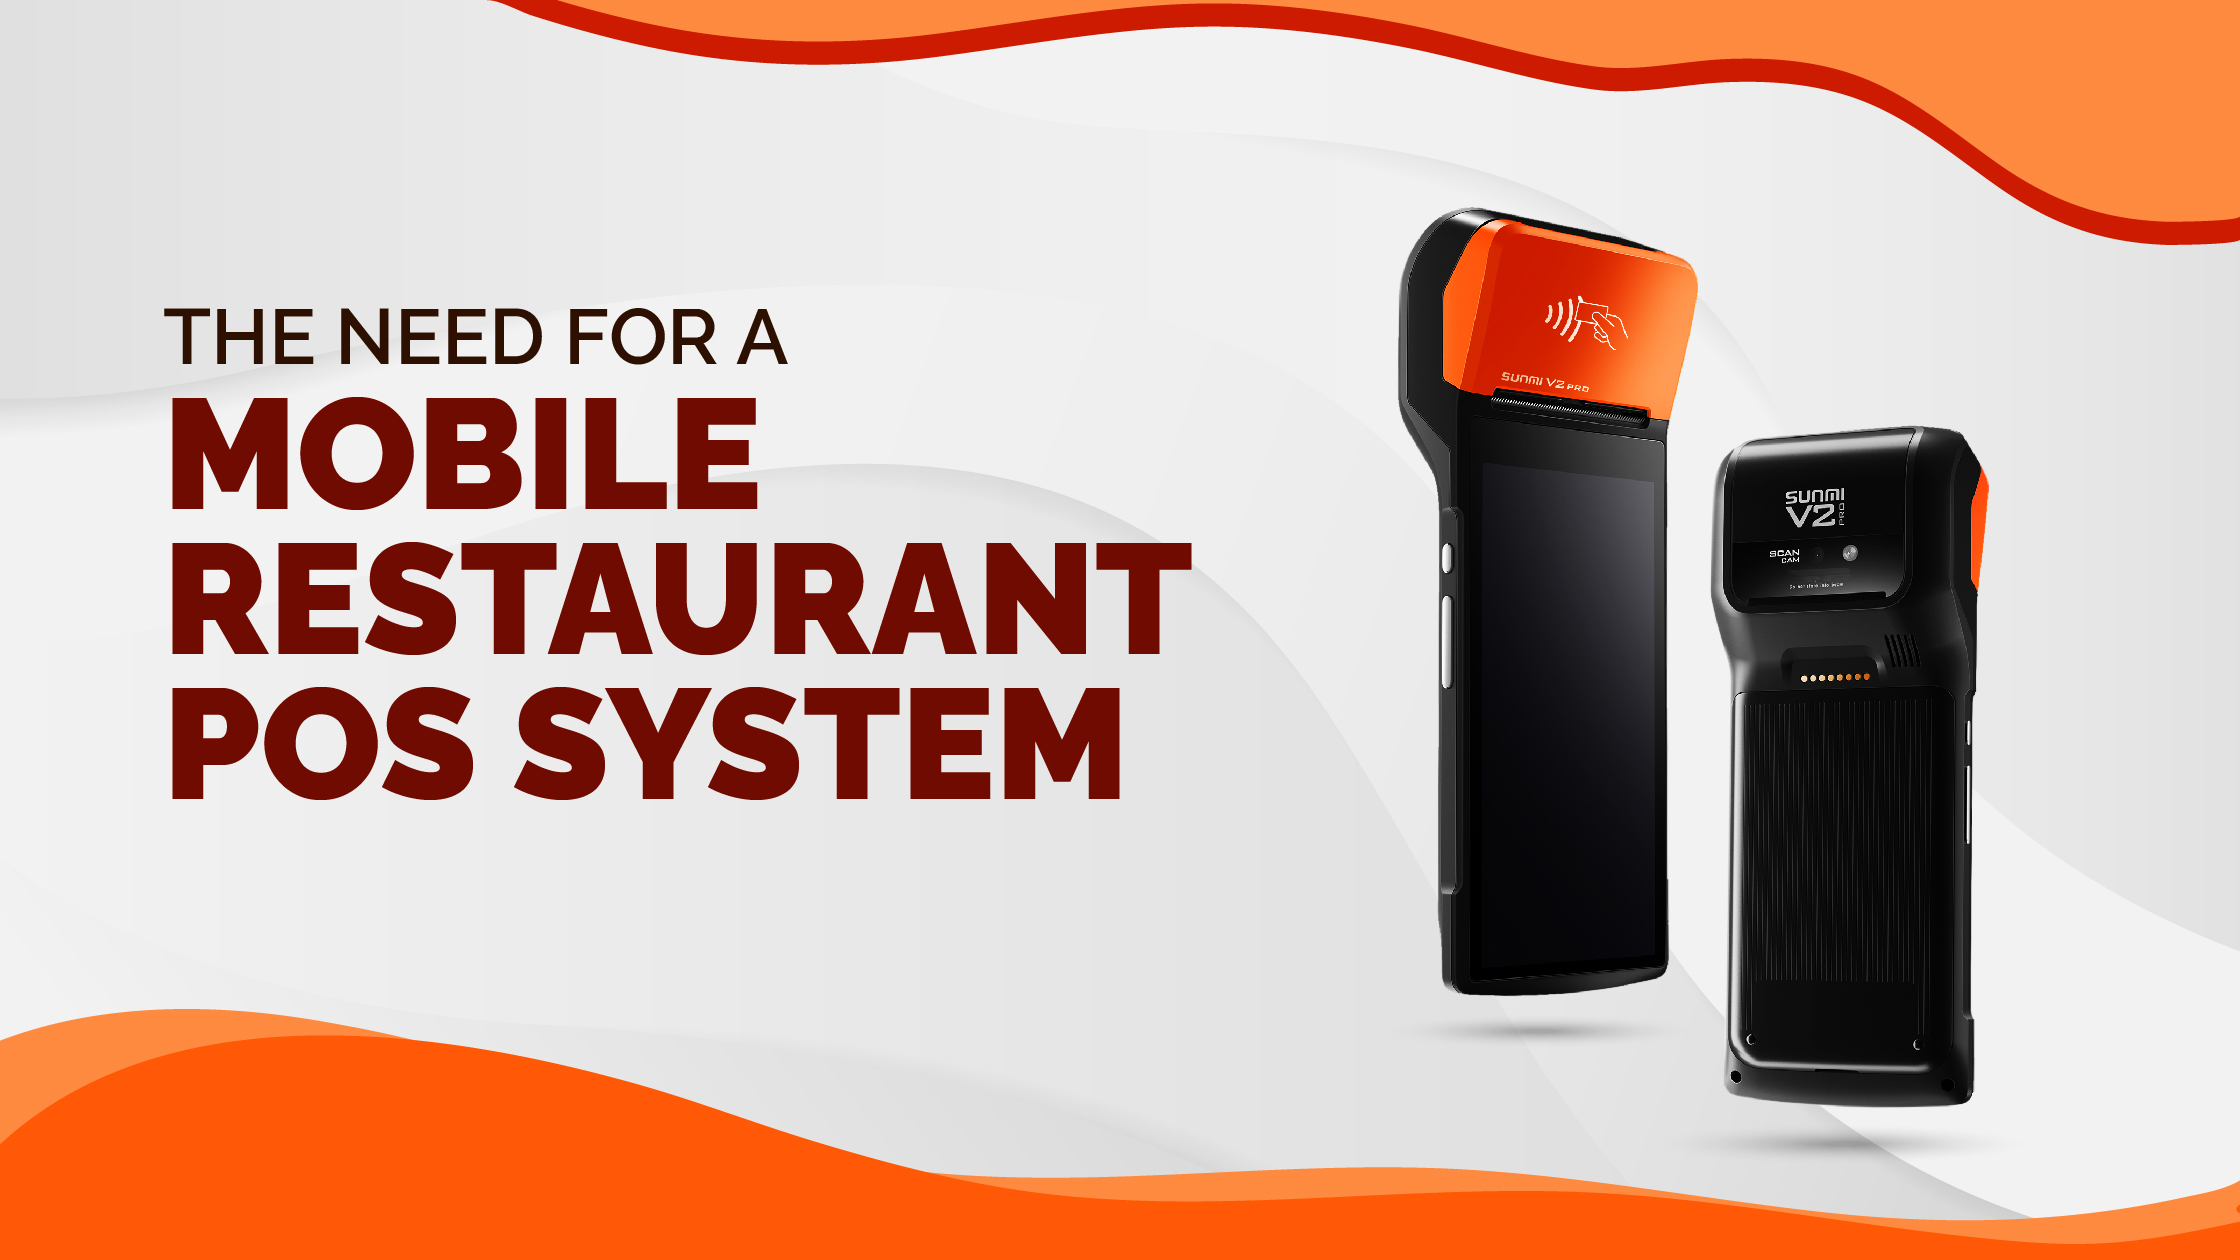 The Need for a Mobile Restaurant POS System